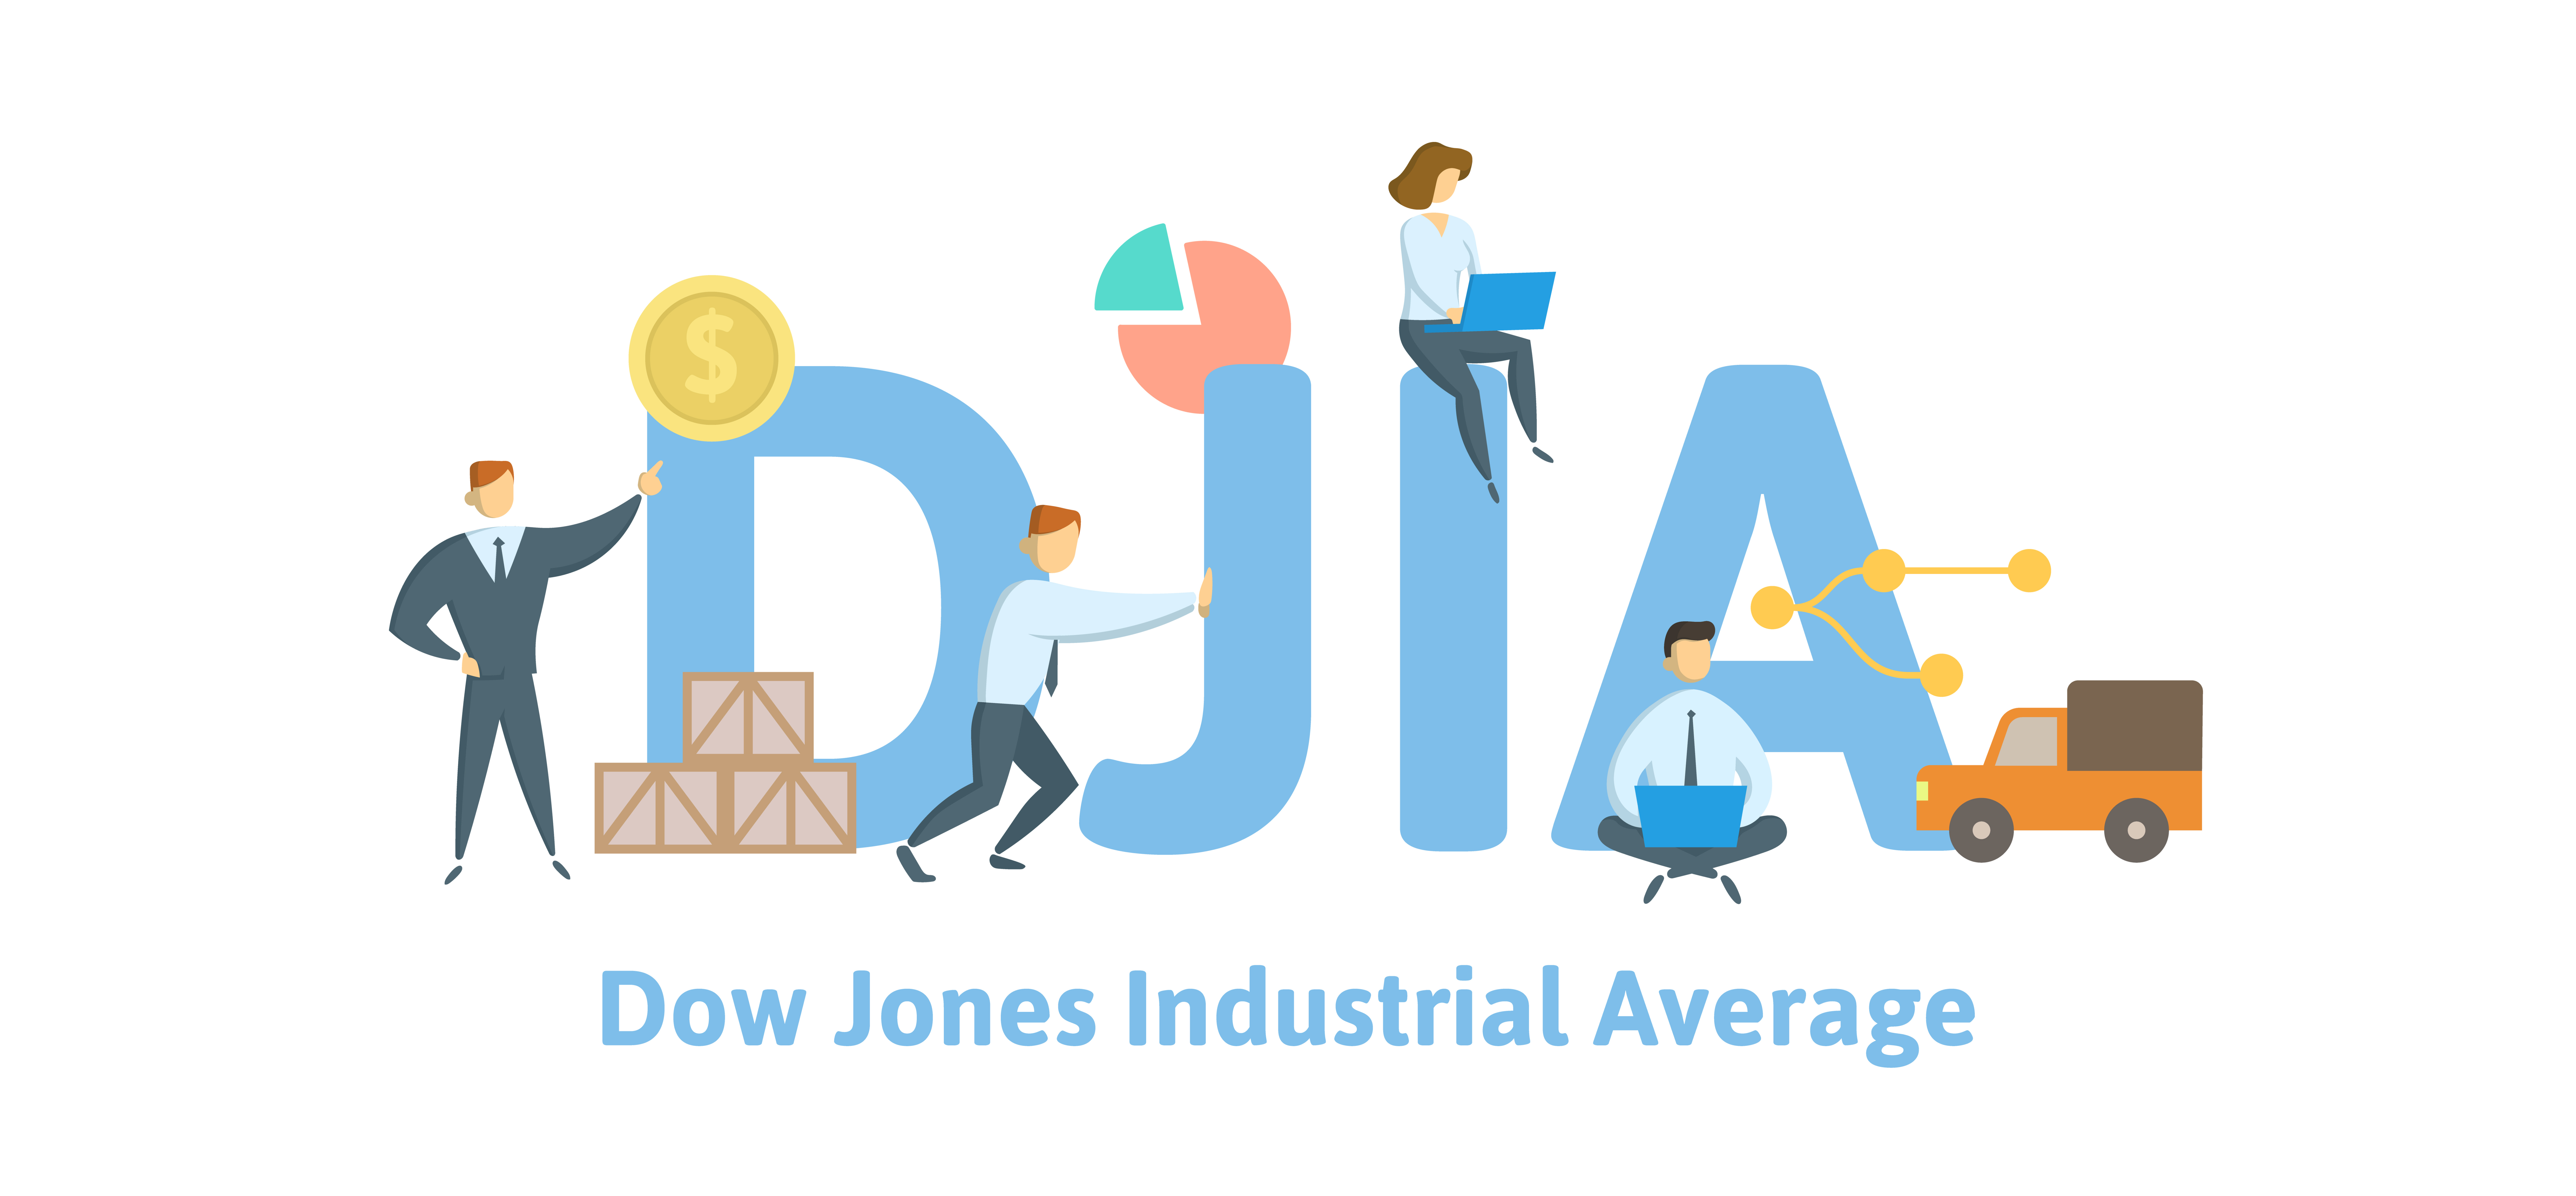 What Is the Dow Jones Industrial Average?